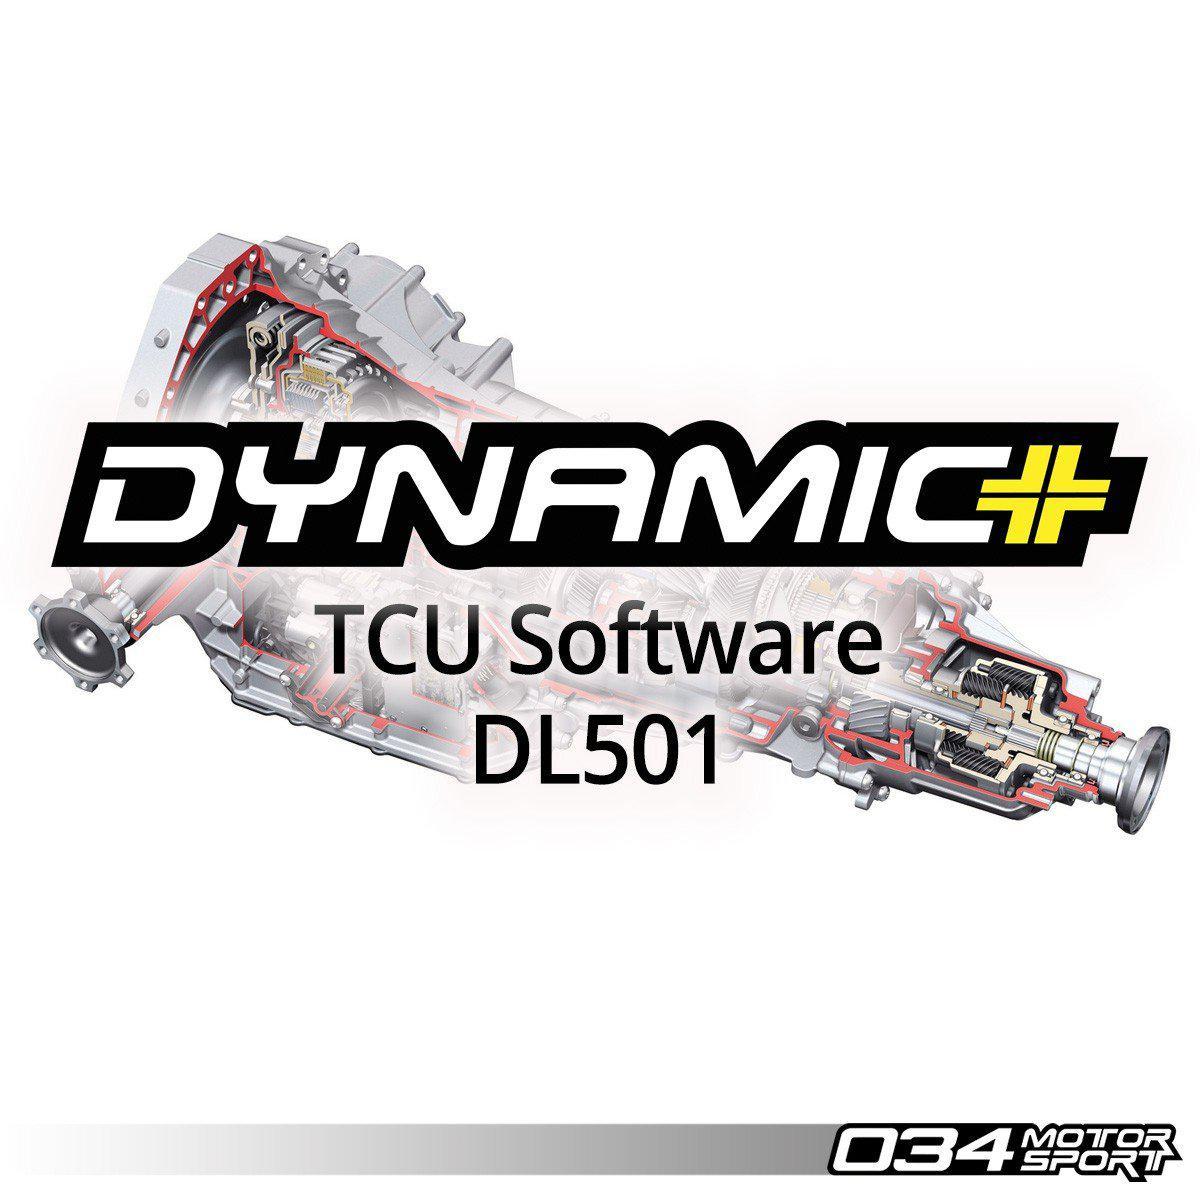 Dynamic+ Dsg Software Upgrade For Audi B8/B8.5 S4/S5 Dl501 Transmission-A Little Tuning Co